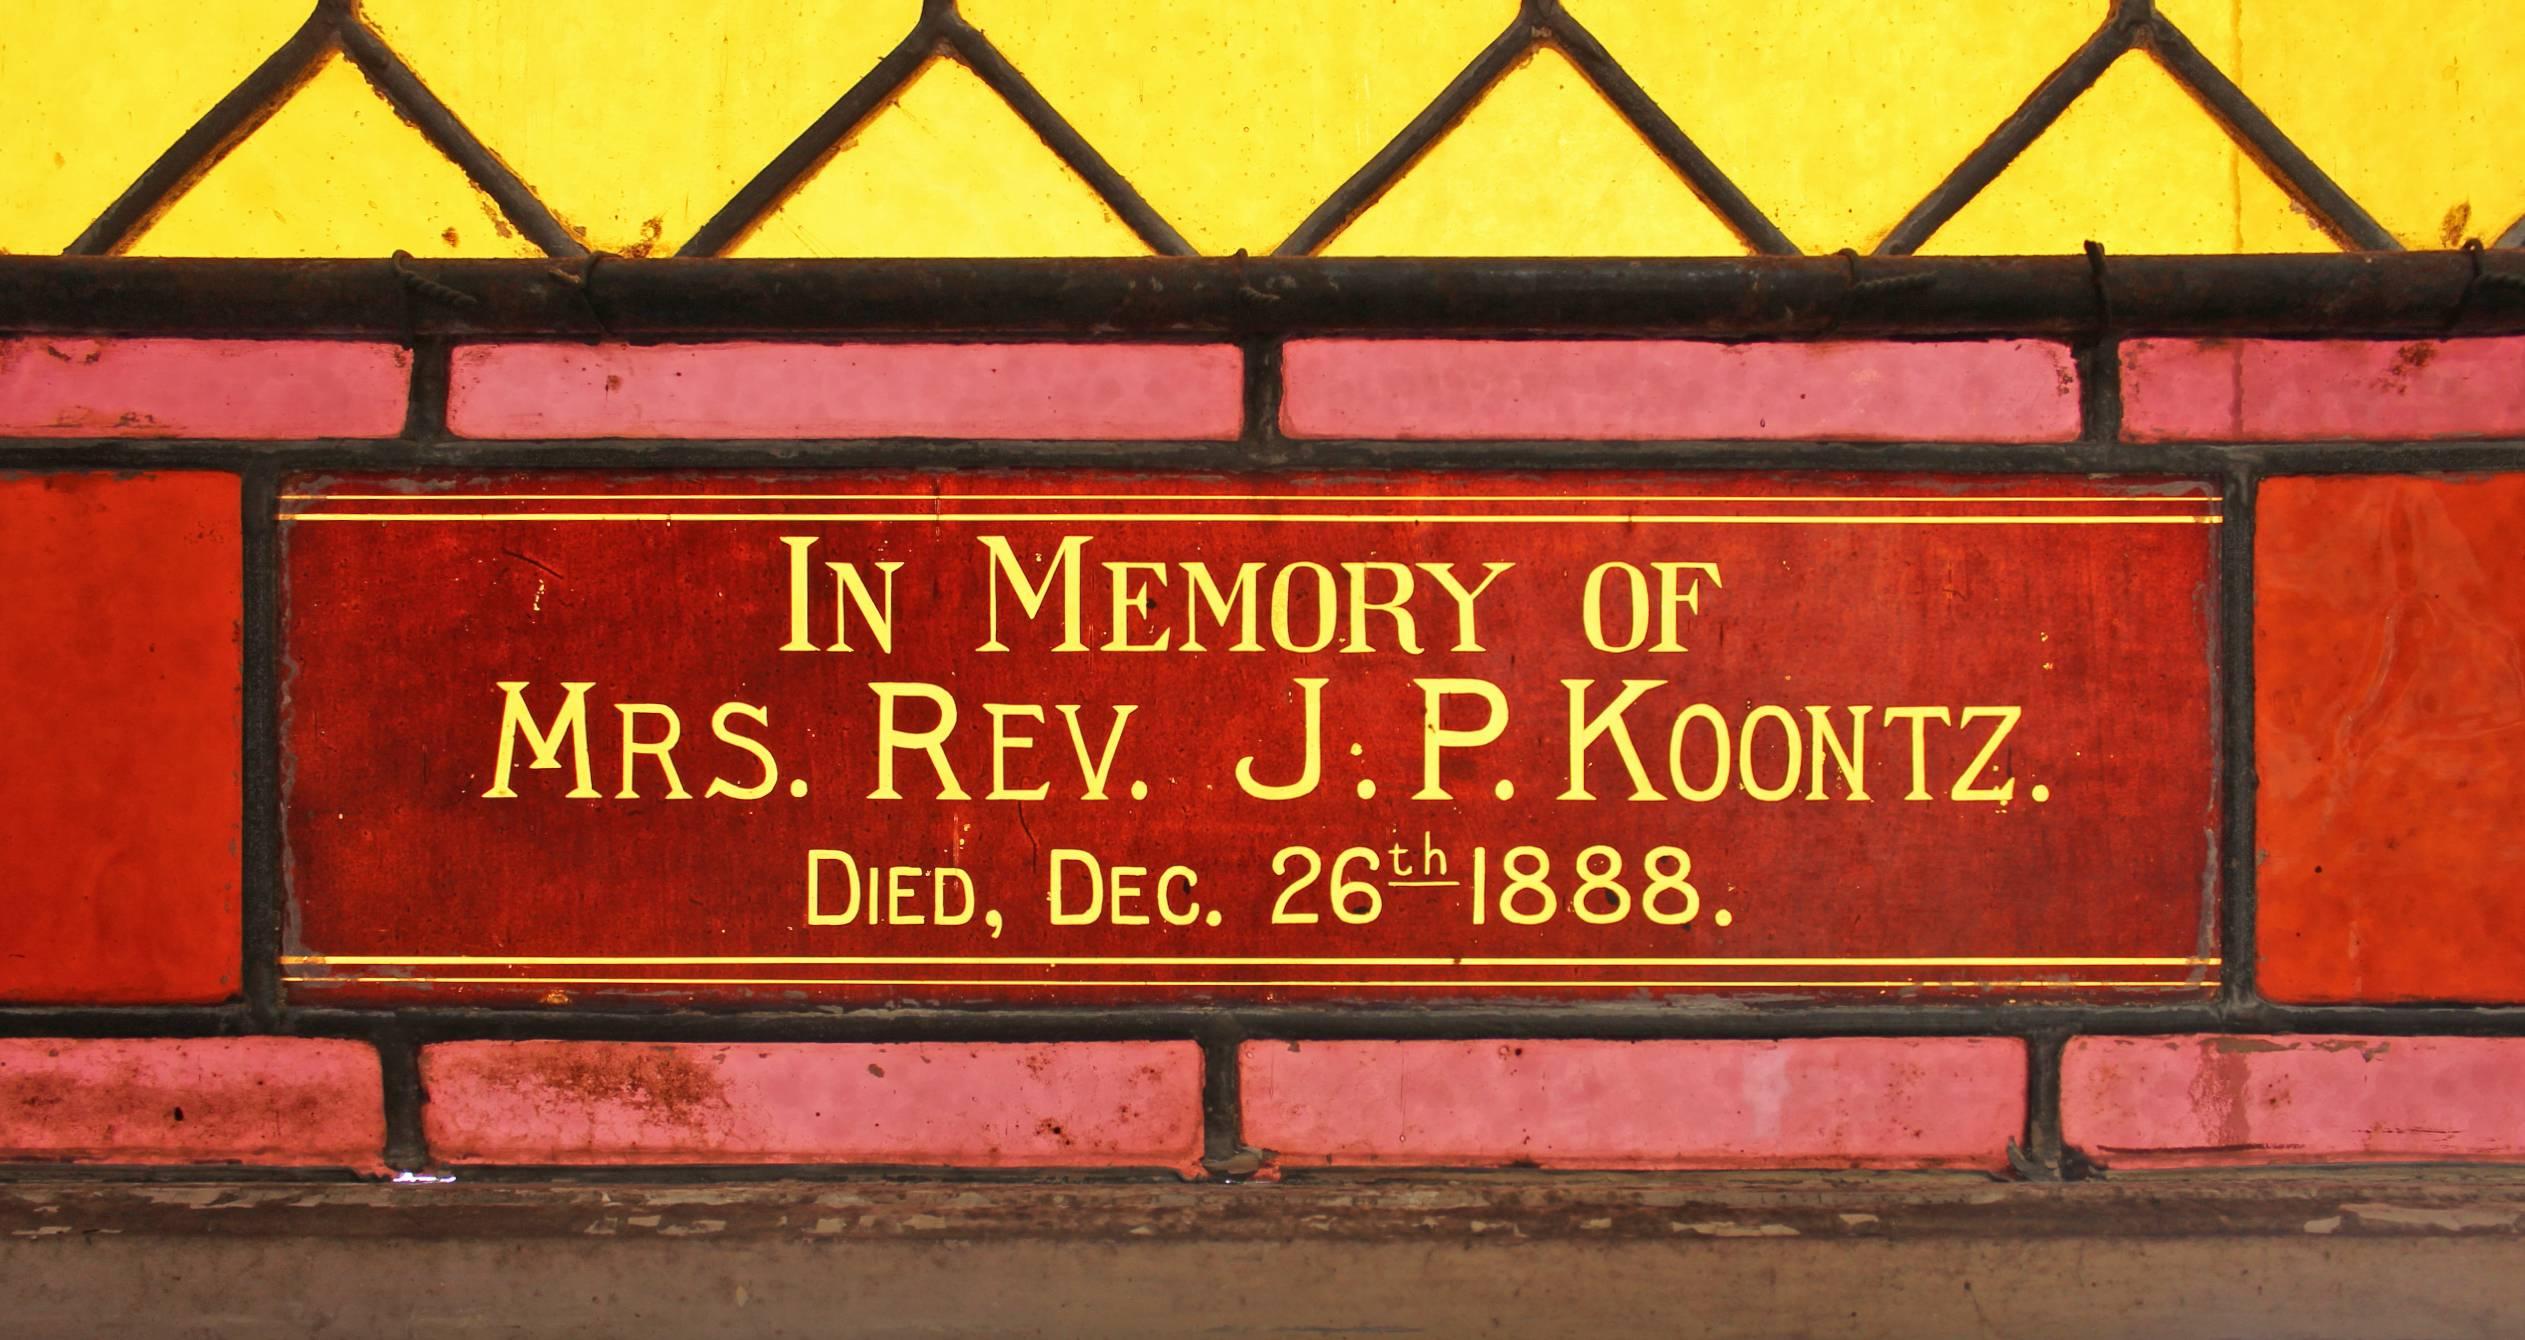 Reverend Josiah Perry Koontz was a Methodist minister in the late 19th and early 20th century from Cumberland, PA. Created in the early 20th century and installed in a no longer extant church, Rev. Koontz commissioned the window in memory of his